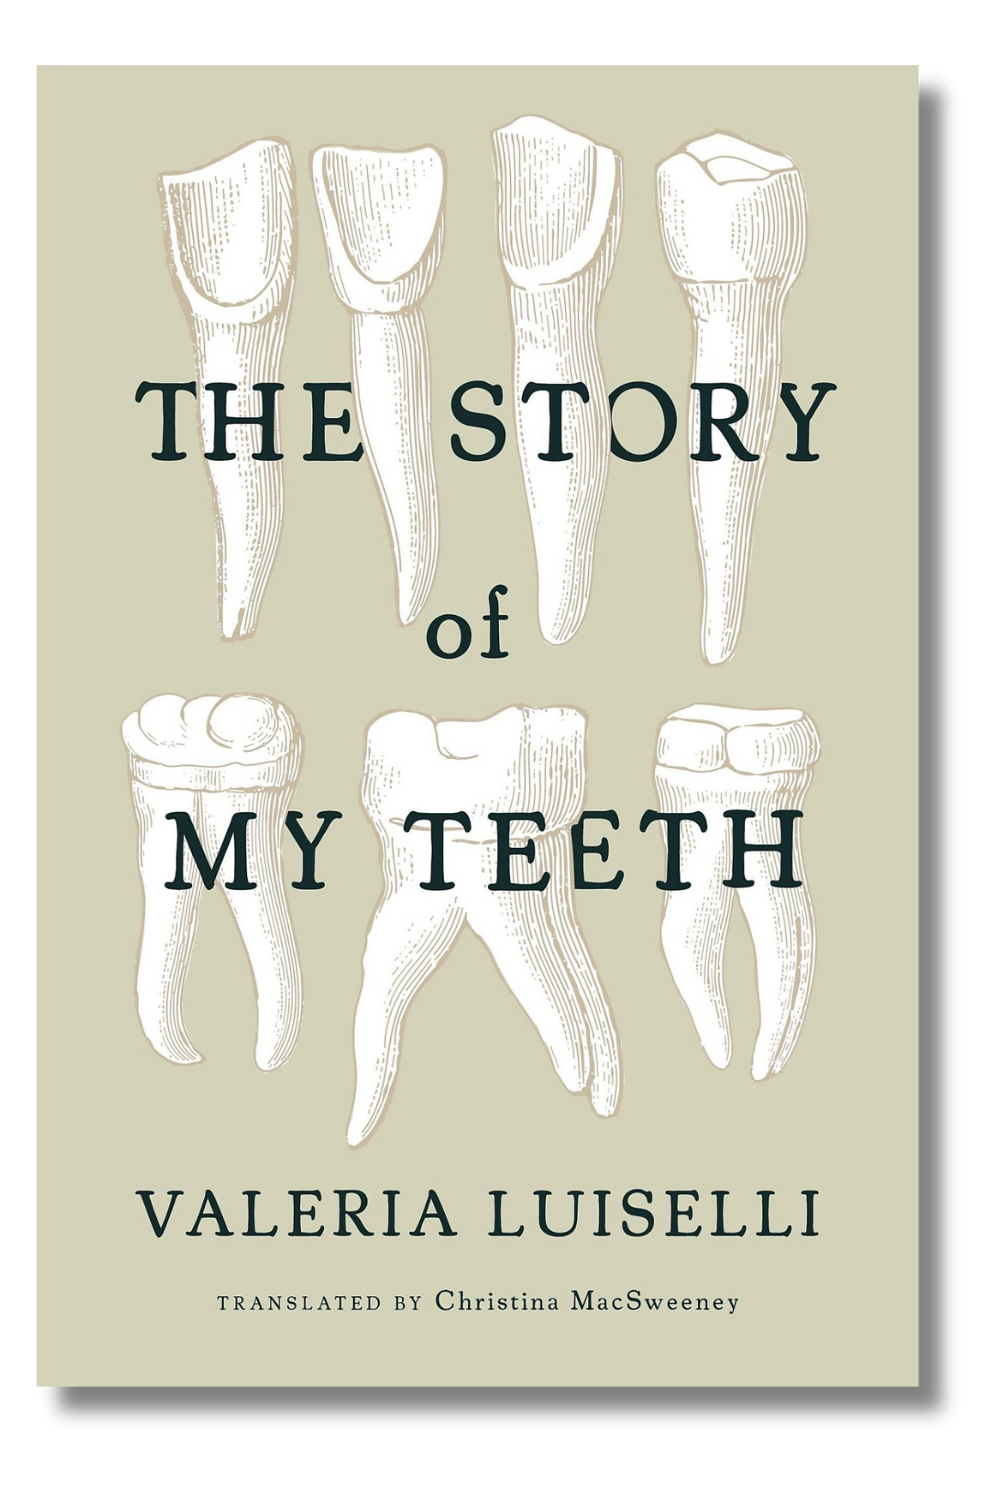 The cover of "The Story of My Teeth" by Valeria Luiselli